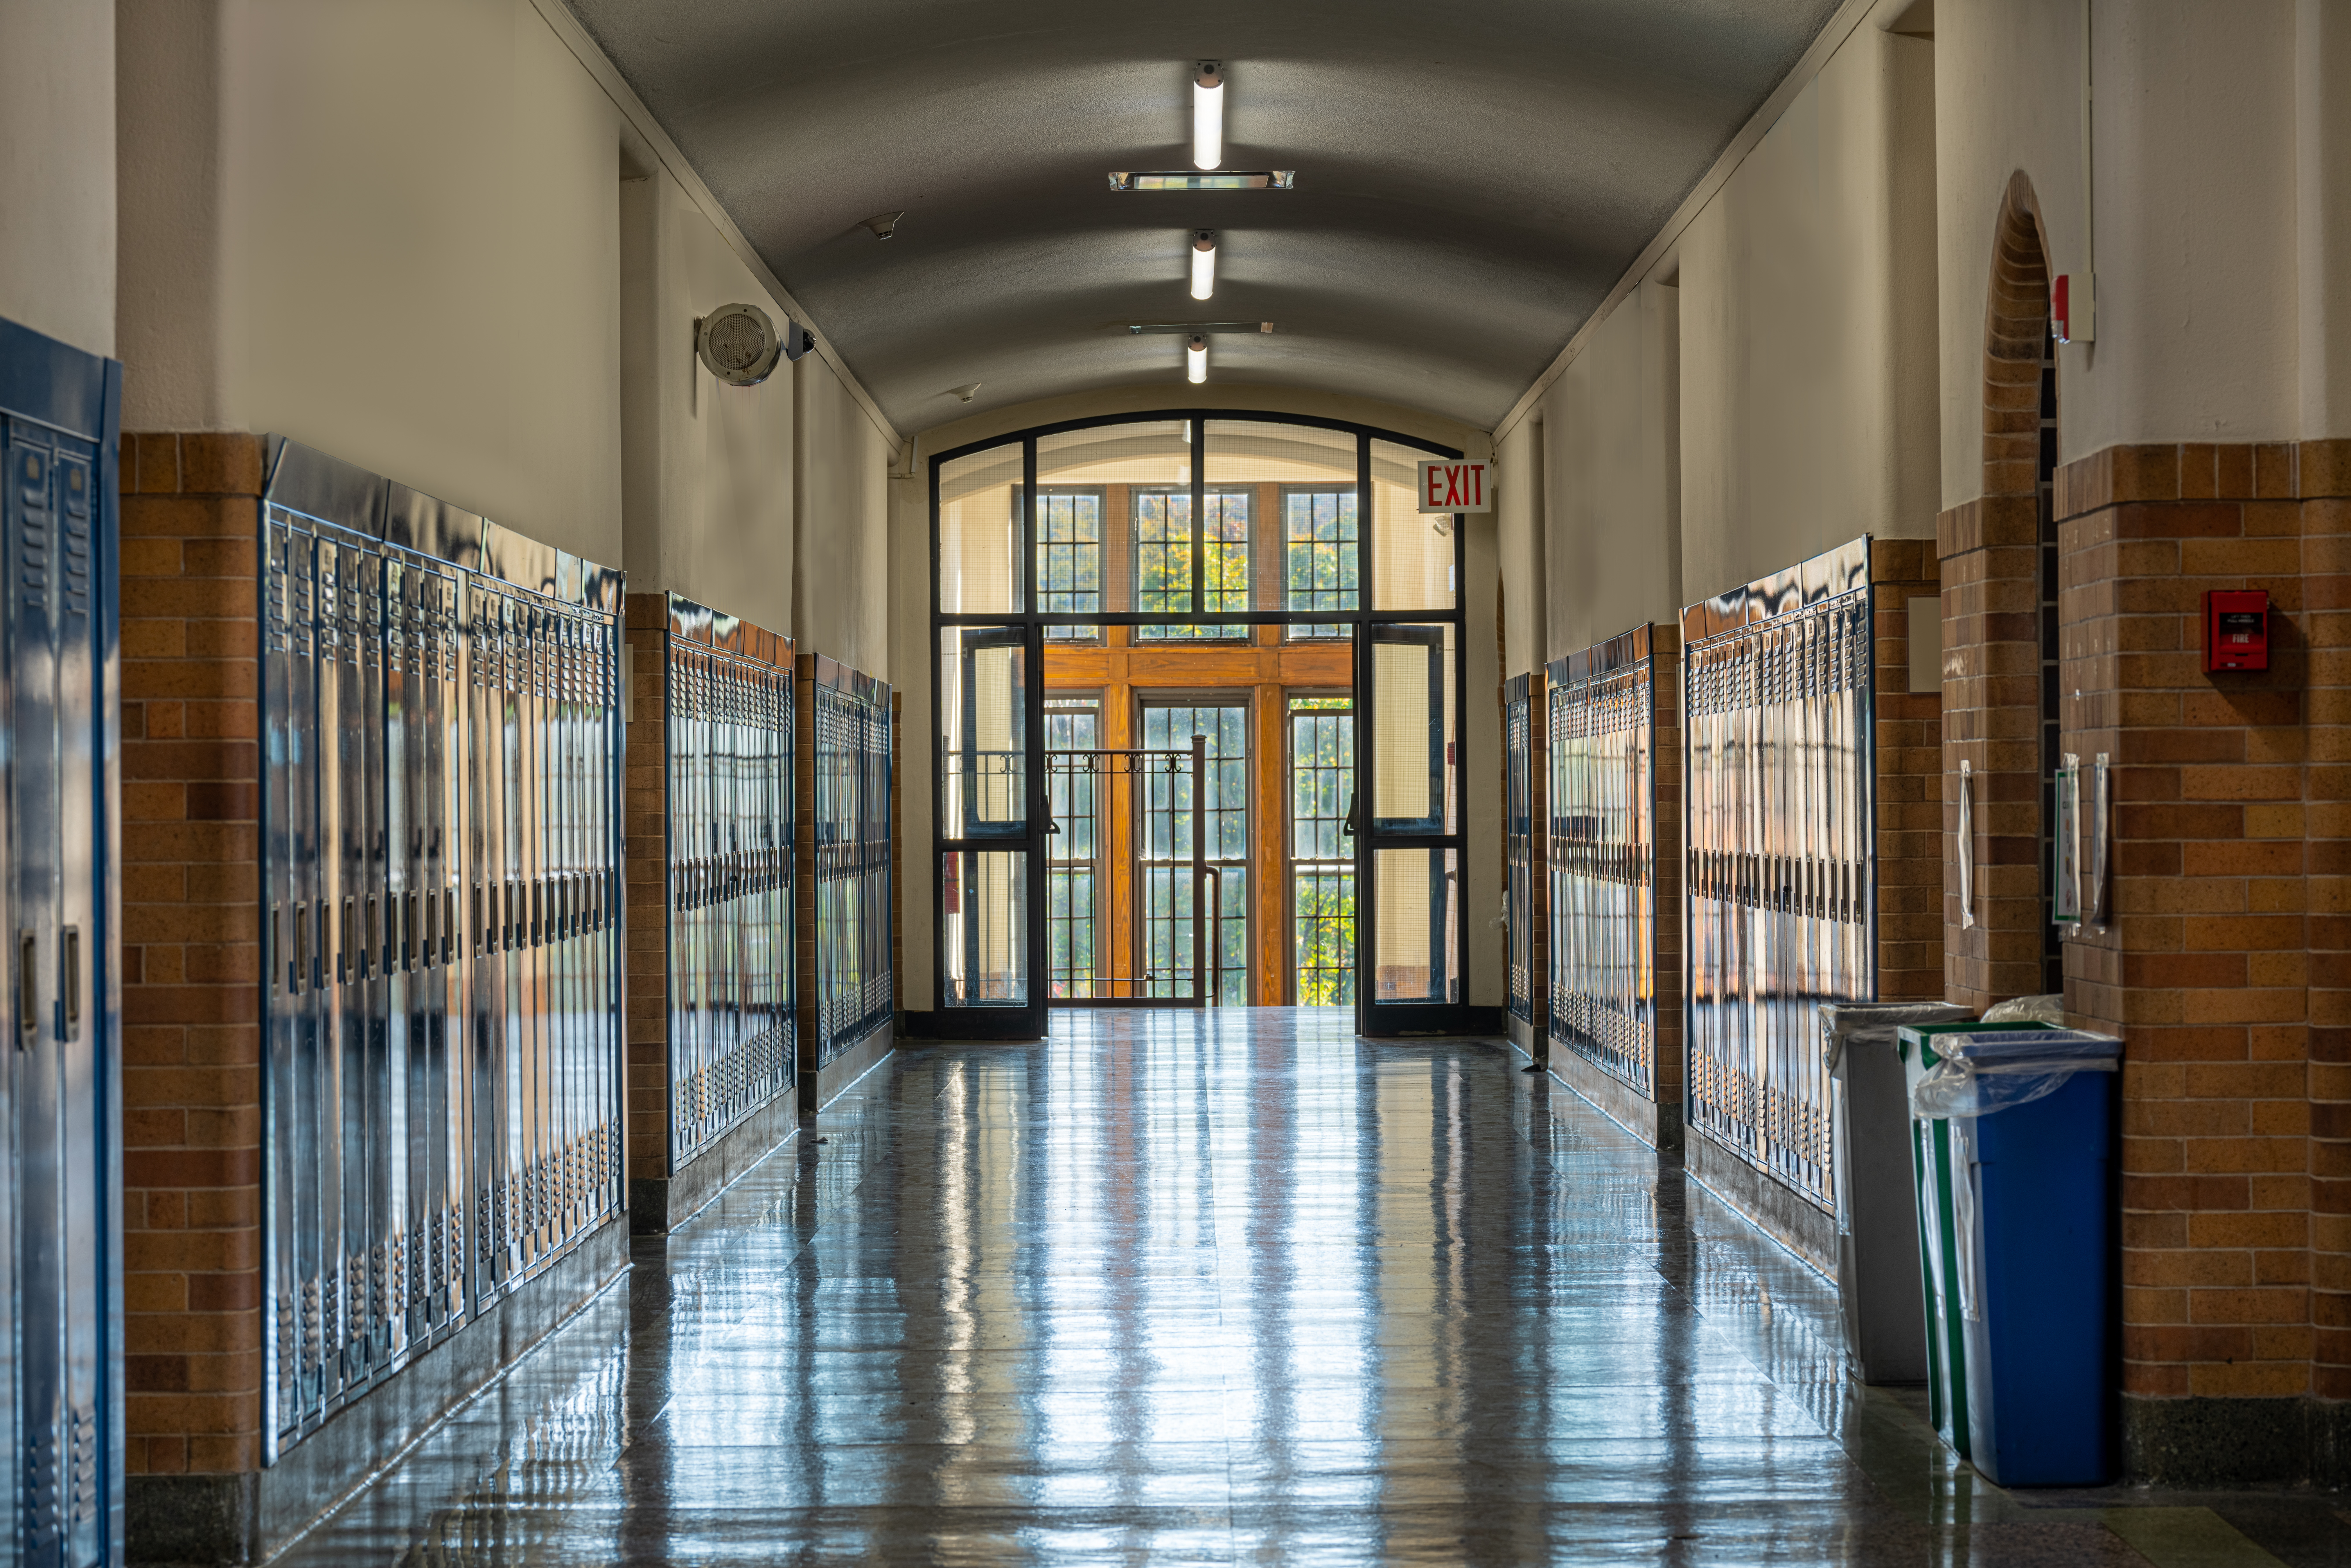 The Importance of Advanced Locking Systems in K-12 Schools